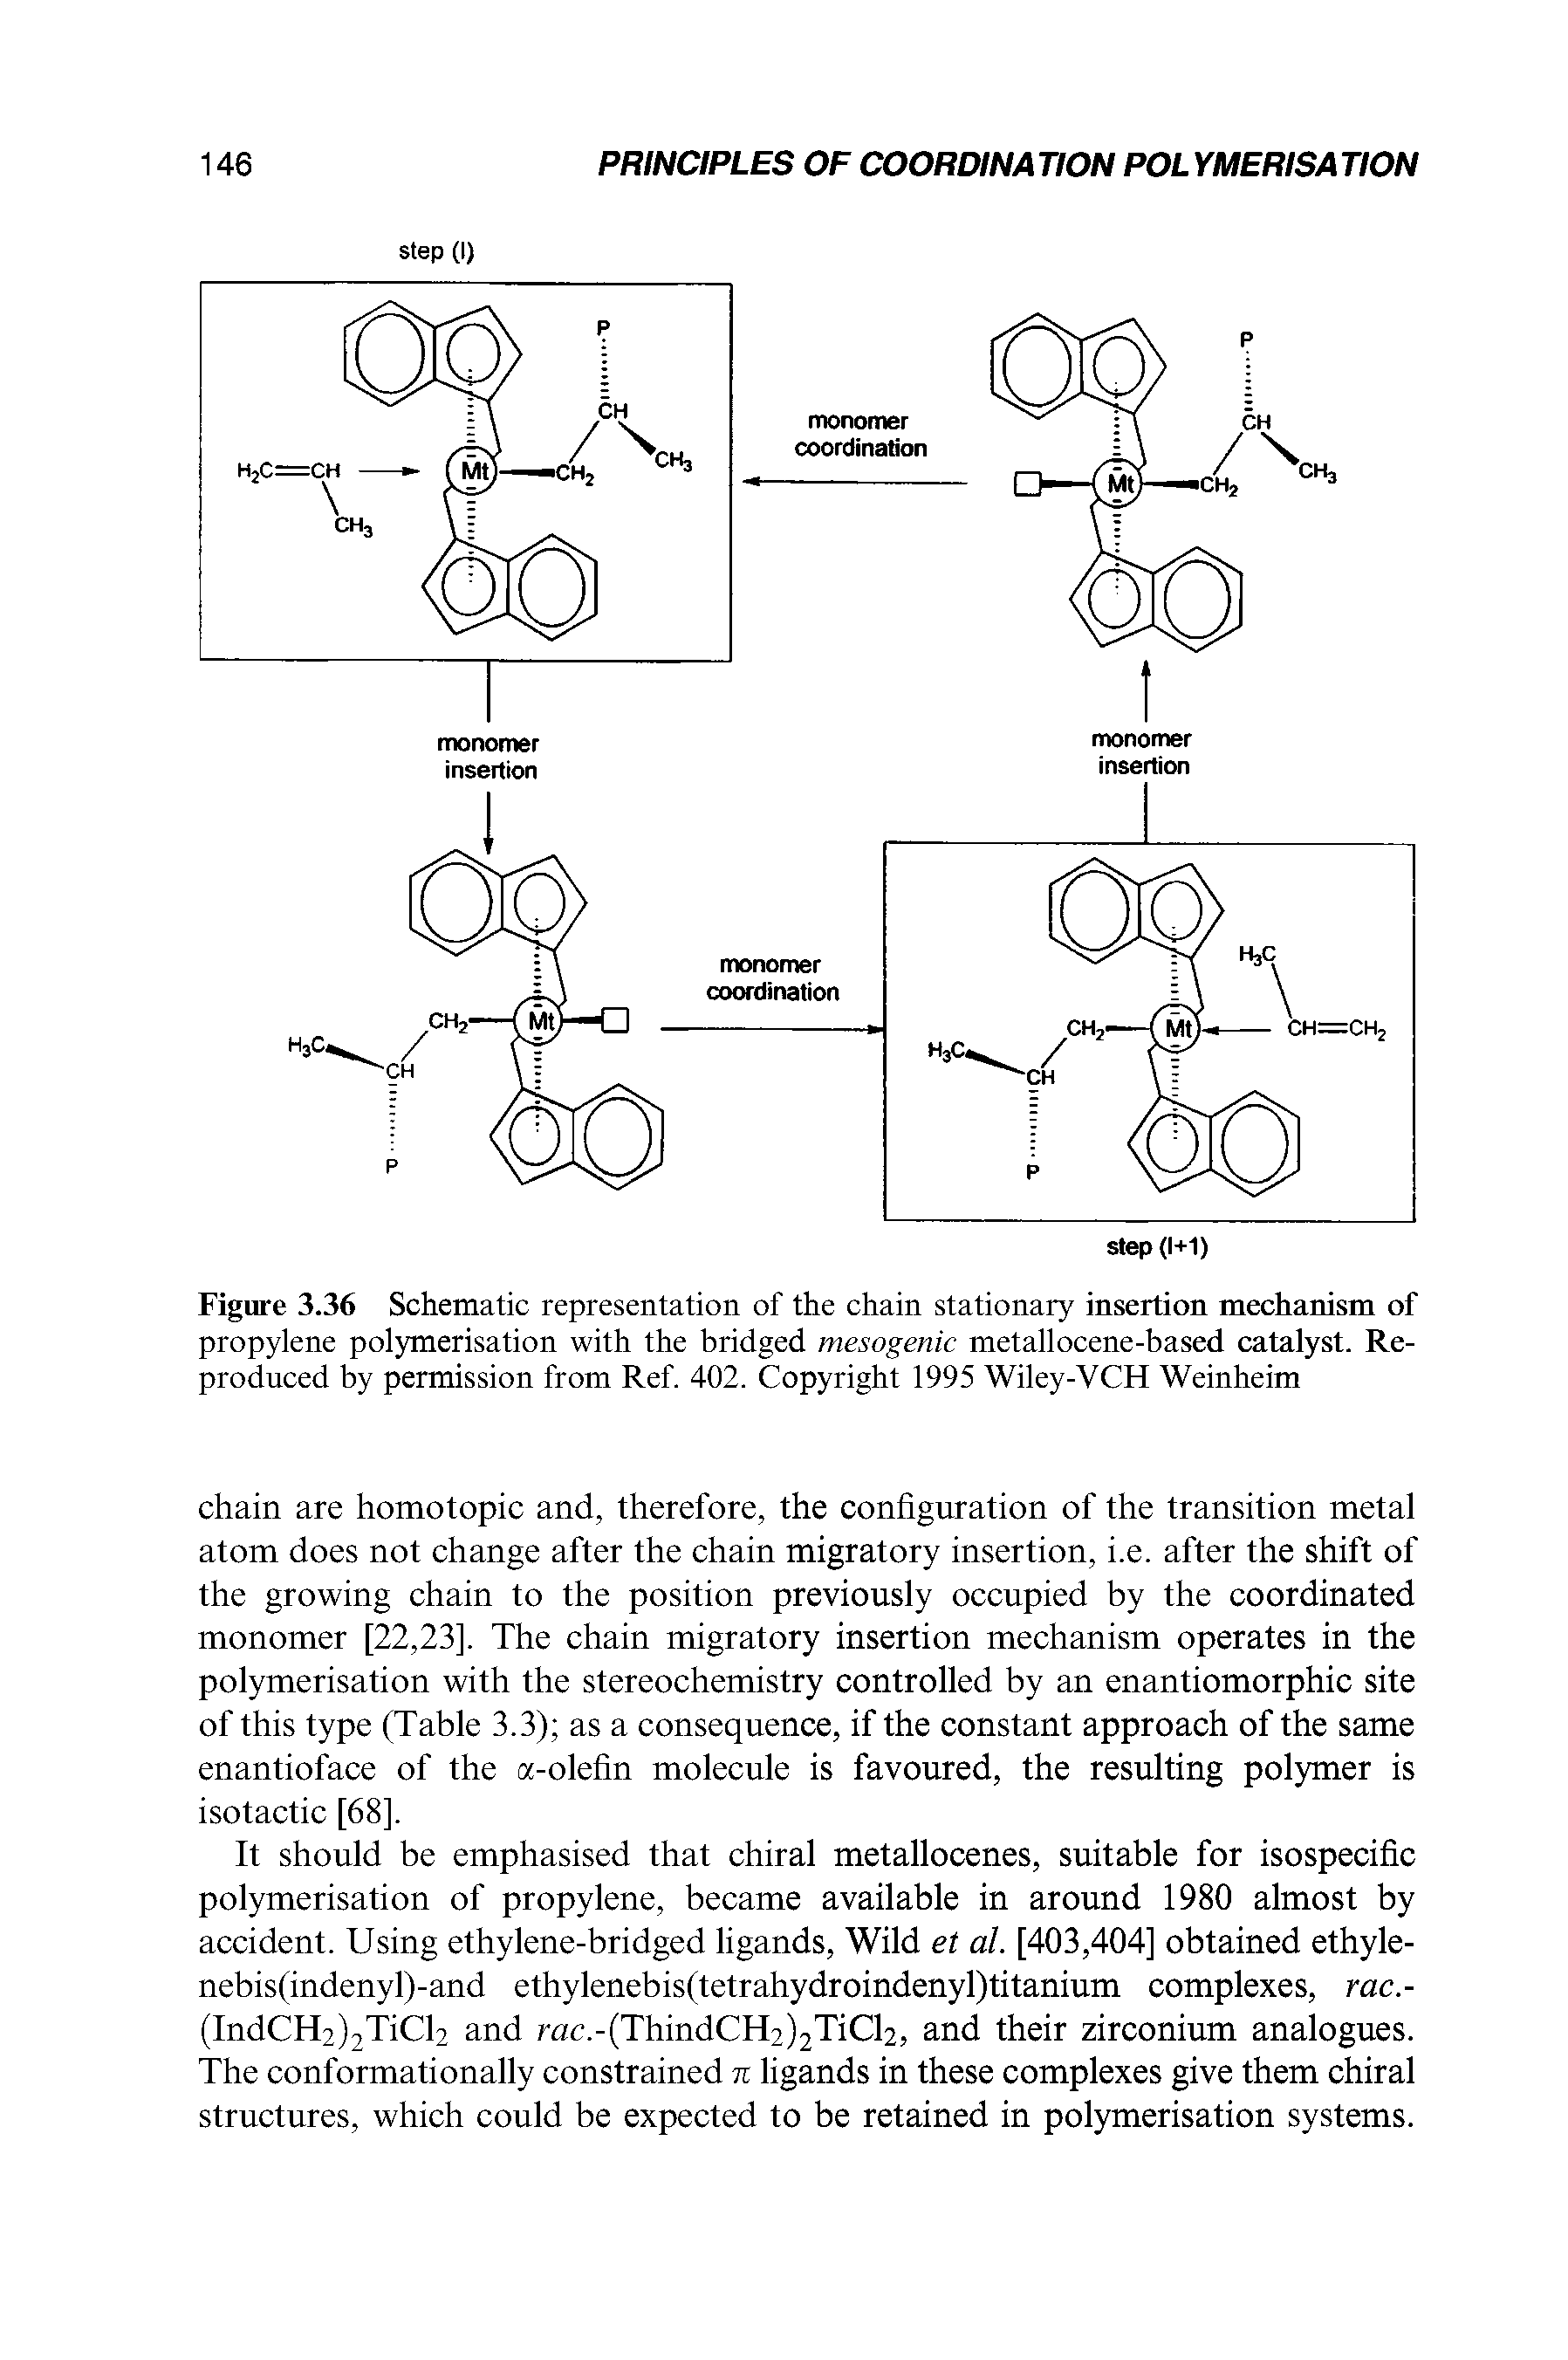 Figure 3.36 Schematic representation of the chain stationary insertion mechanism of propylene polymerisation with the bridged mesogenic metallocene-based catalyst. Reproduced by permission from Ref. 402. Copyright 1995 Wiley-YCH Weinheim...